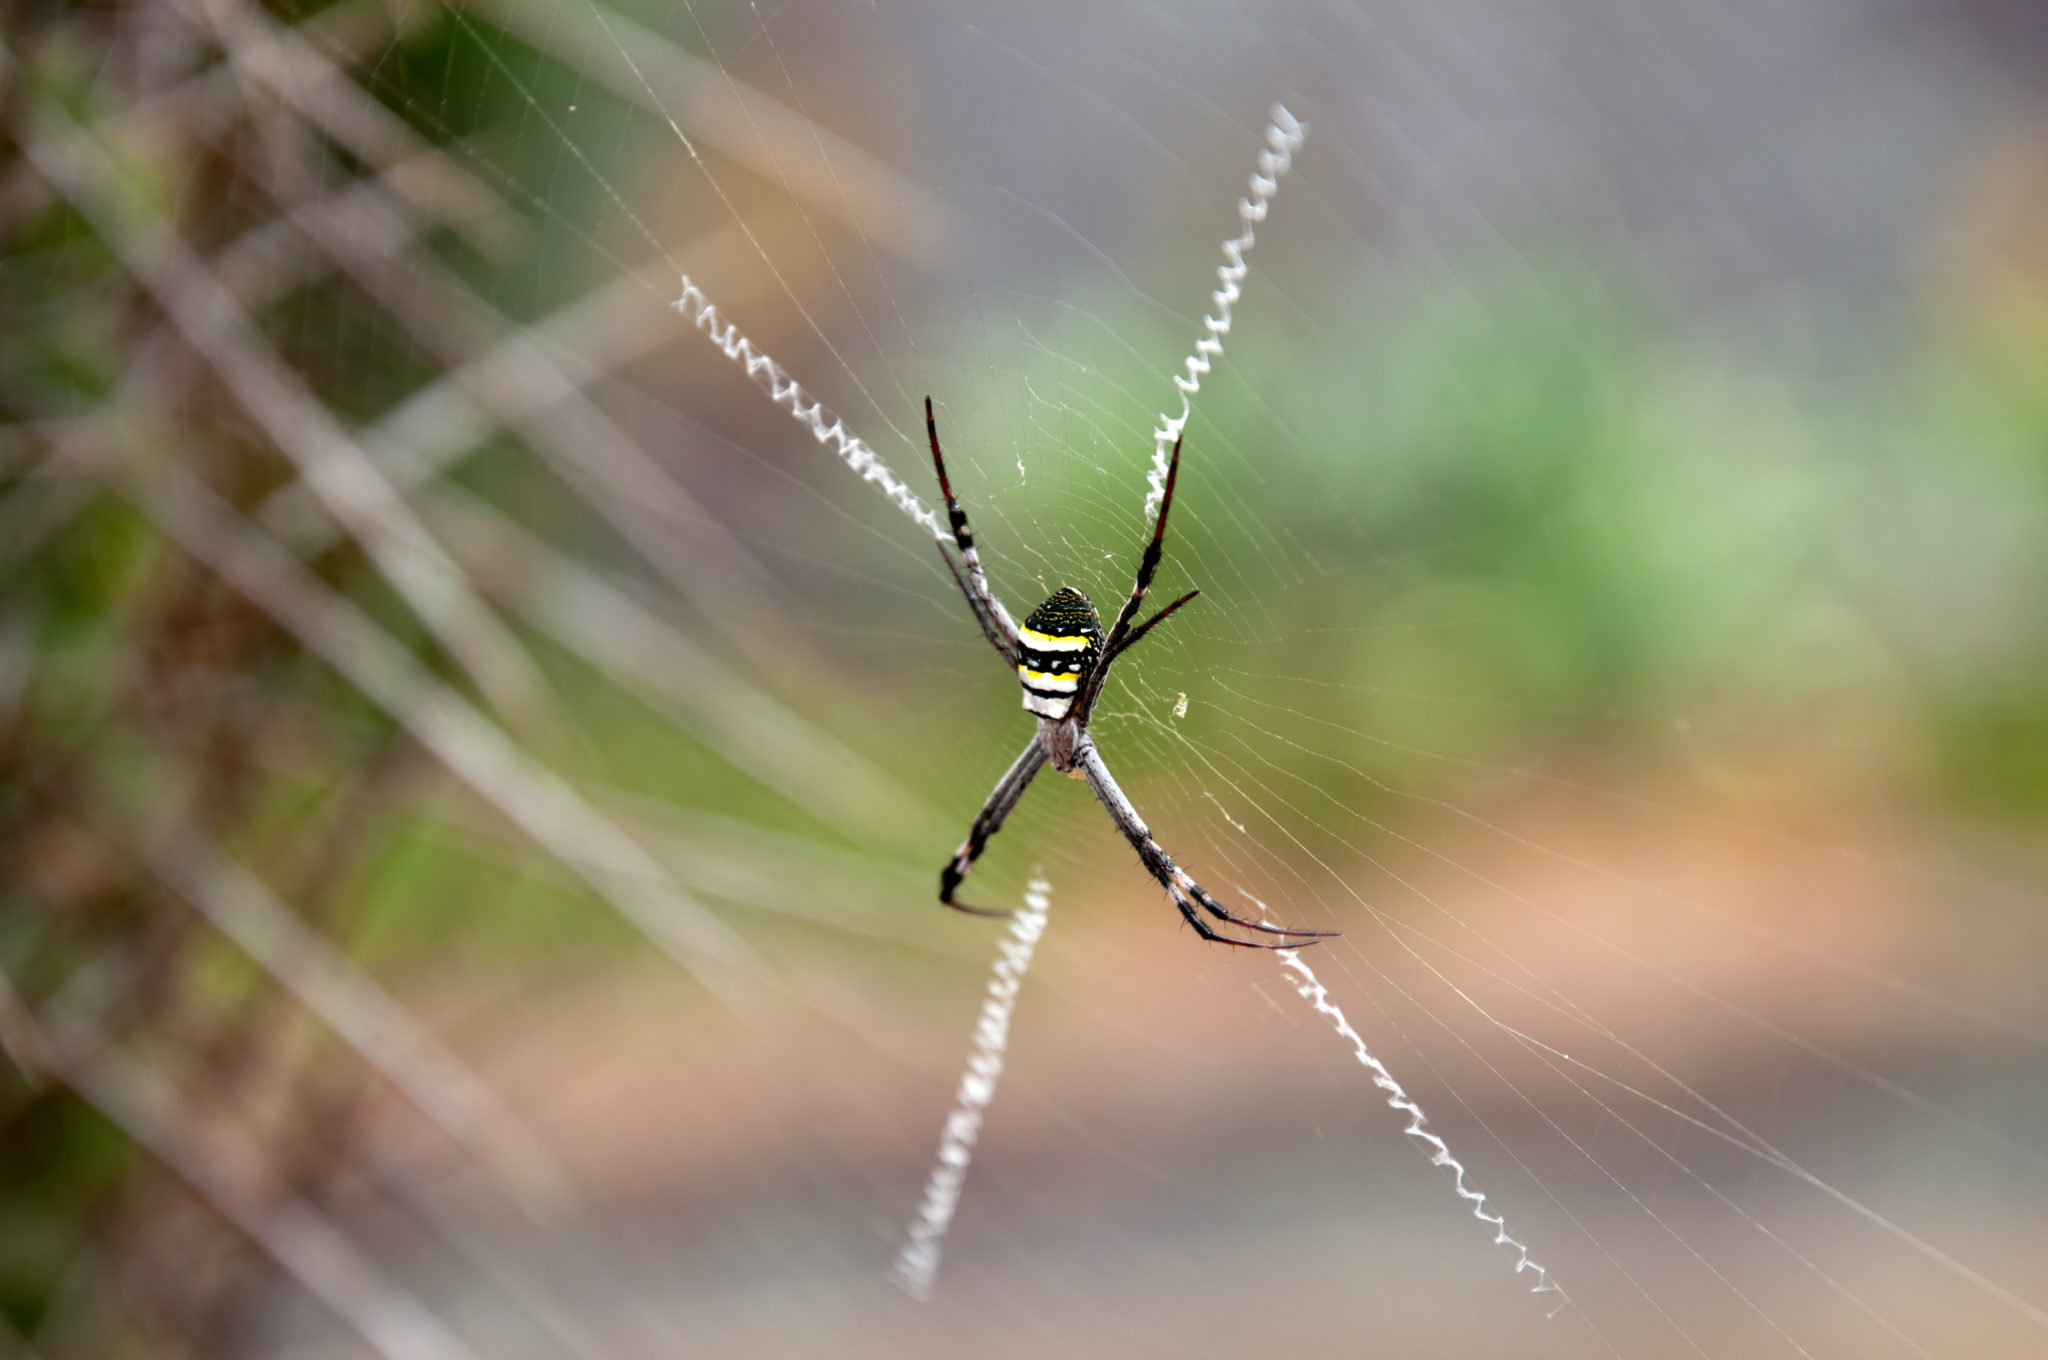 Professional Spider pest control in Canberra